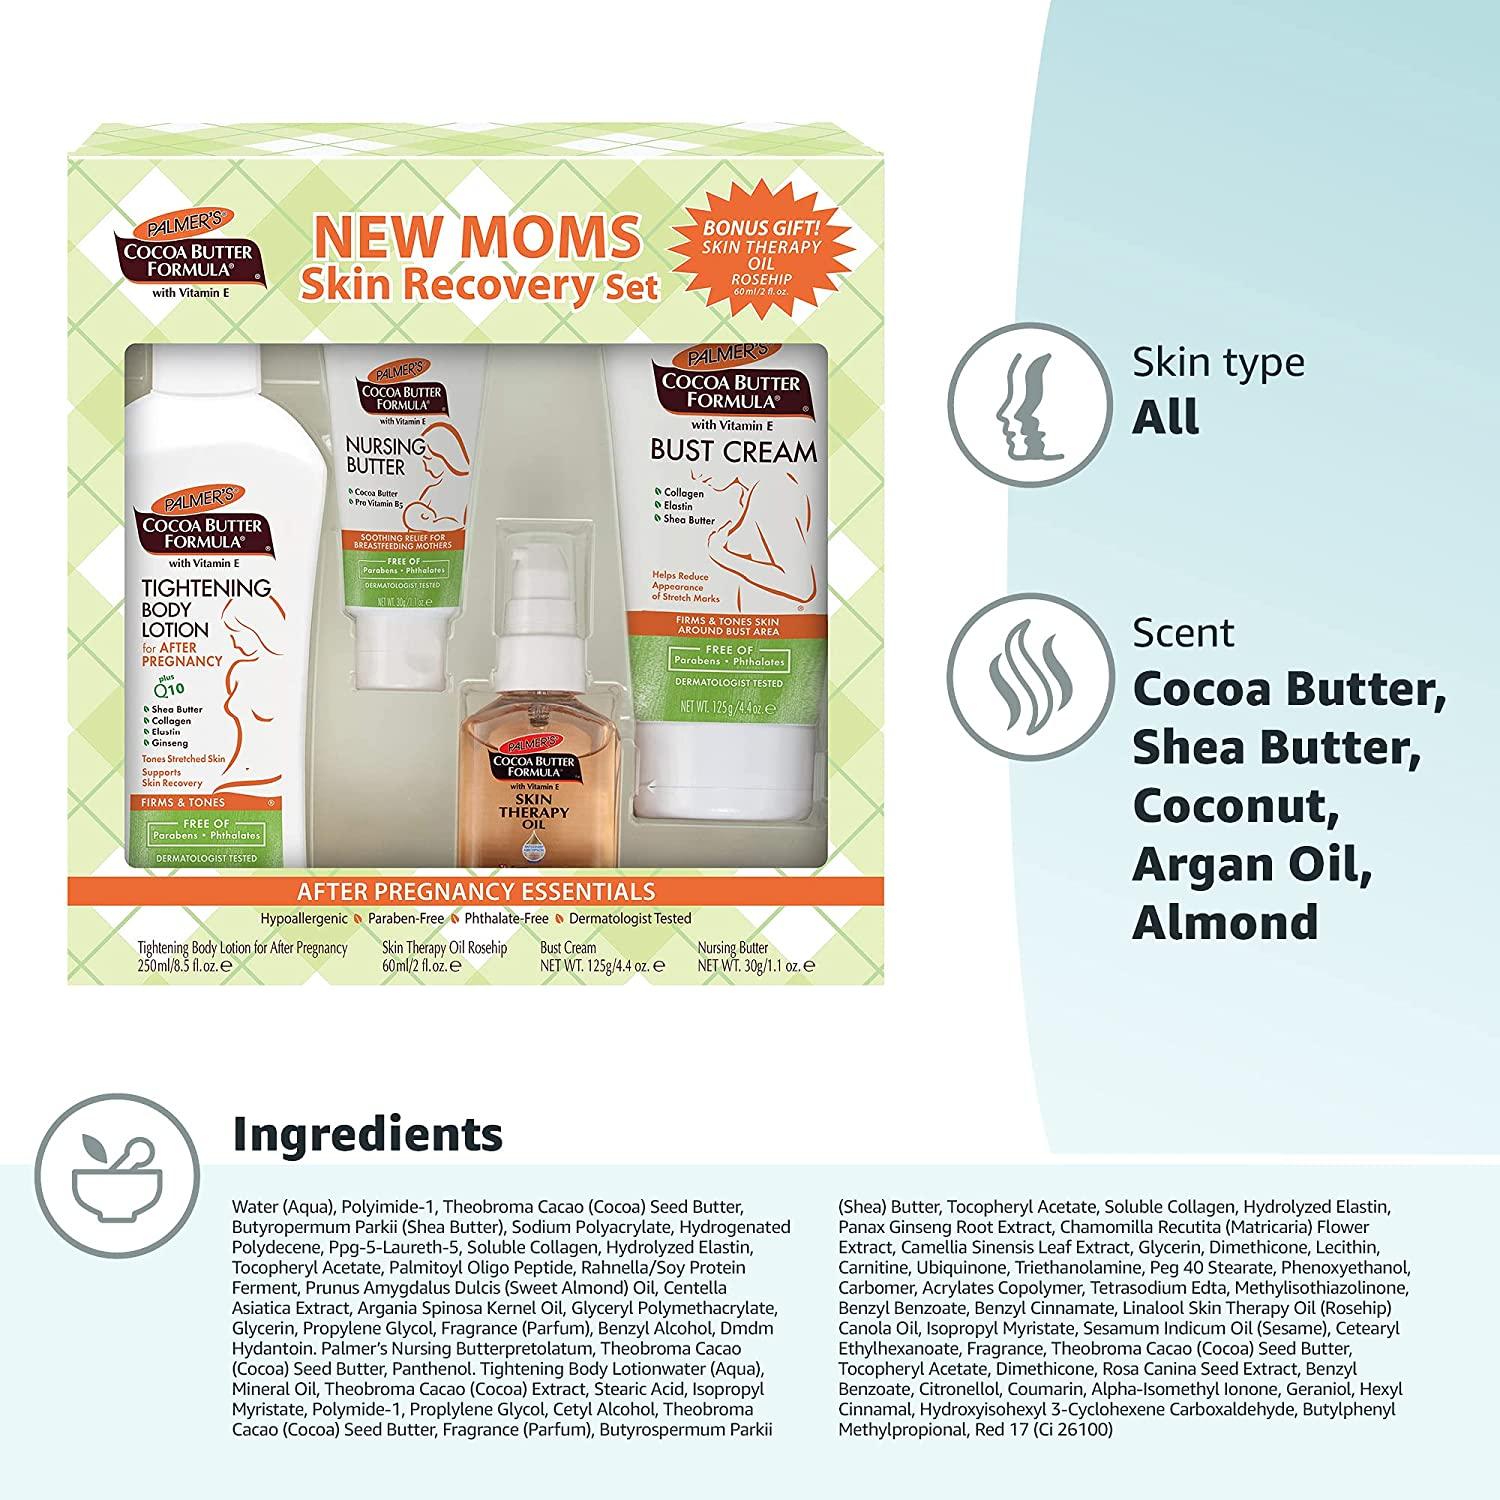 Palmer's Cocoa Butter Formula New Moms Post-Pregnancy Skin Recovery Kit